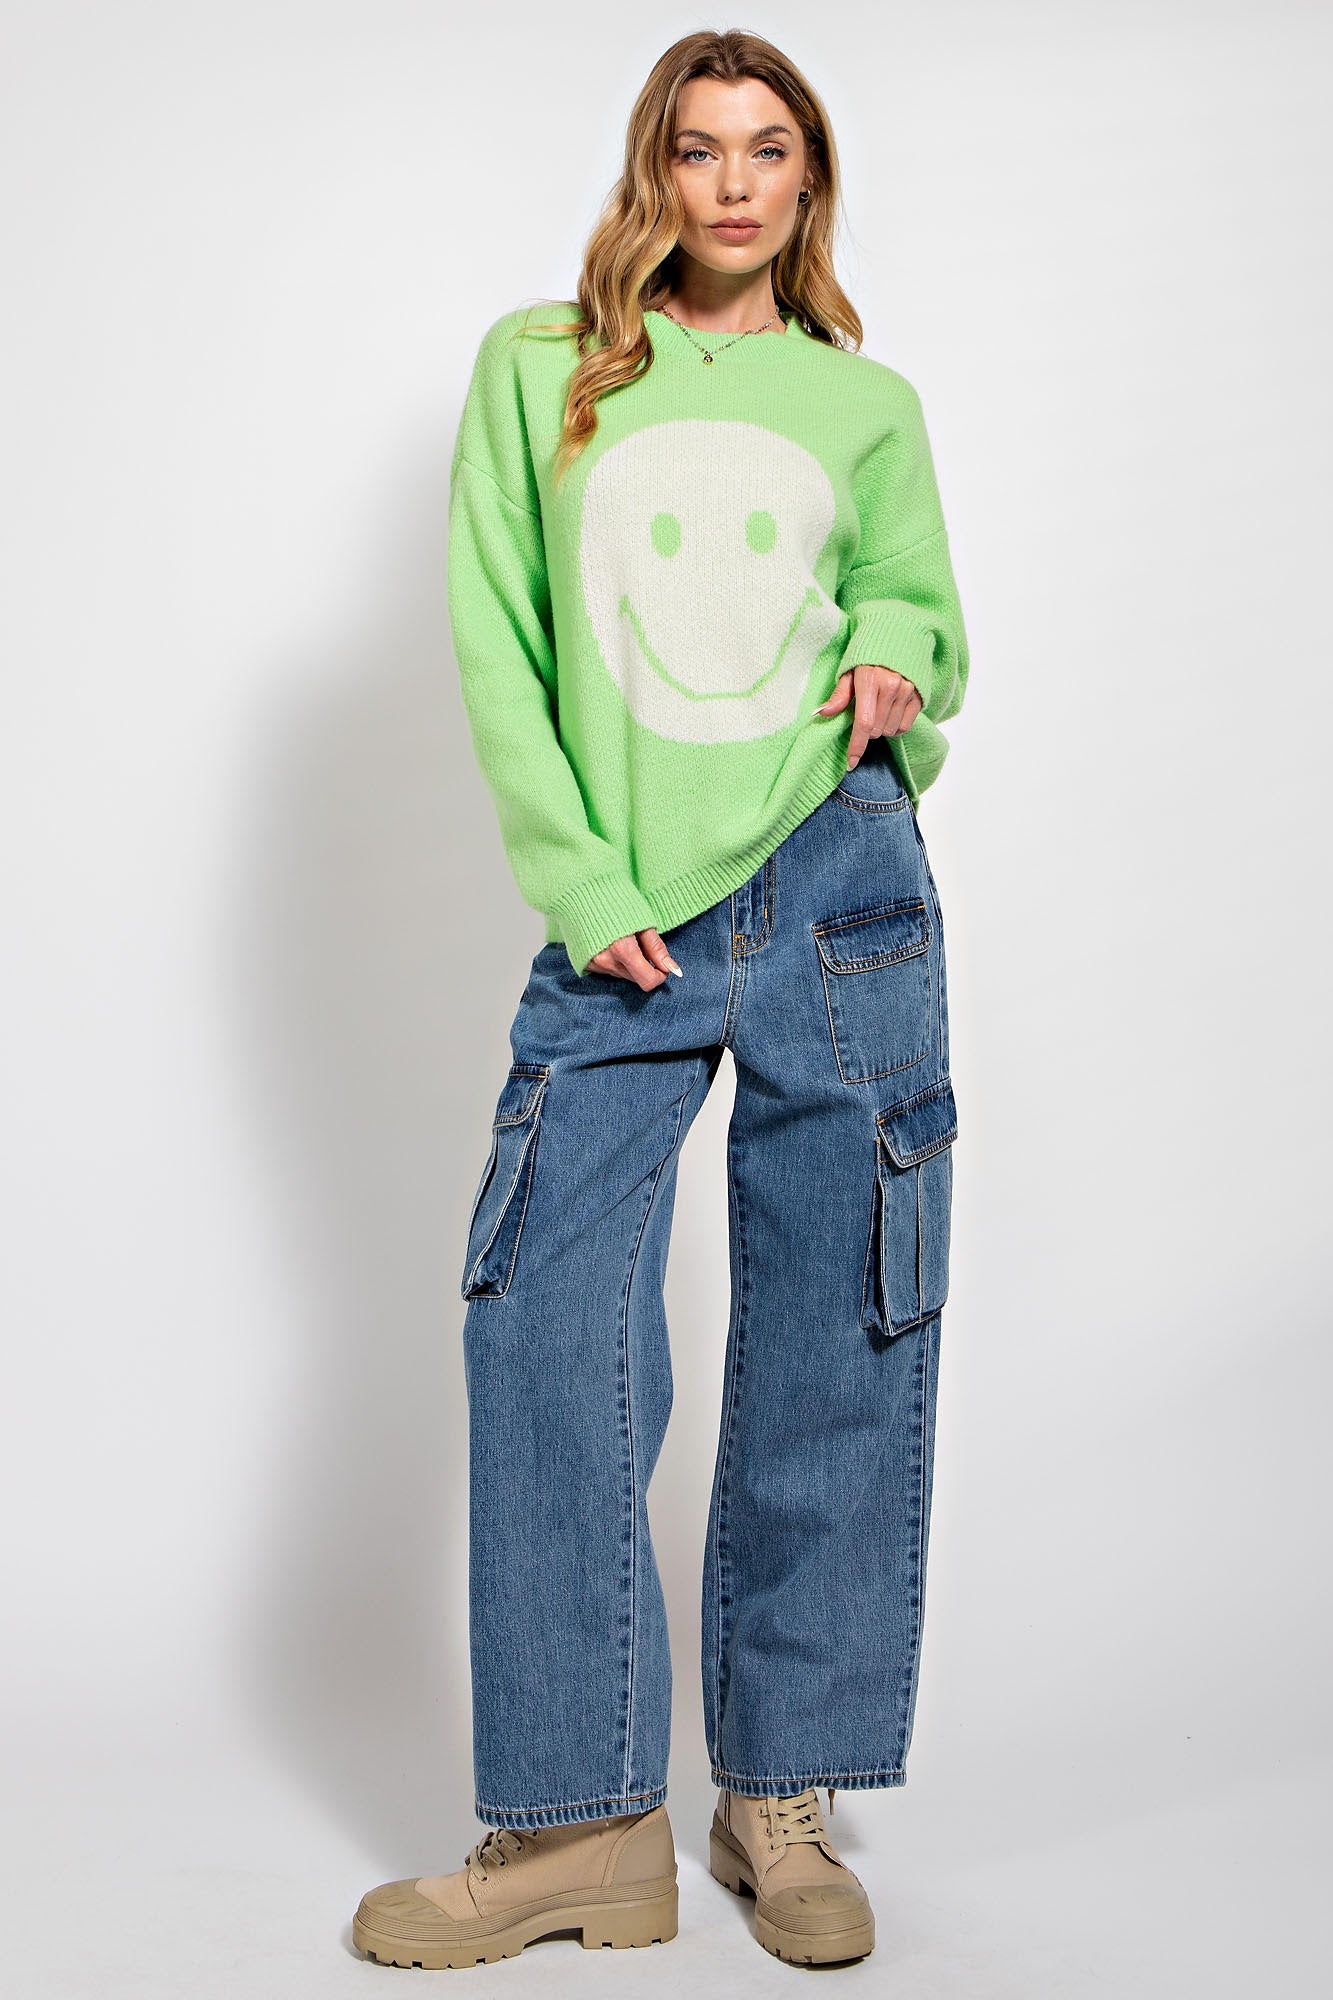 Sadie Smiley Face Knitted Sweater Pullover in Lime